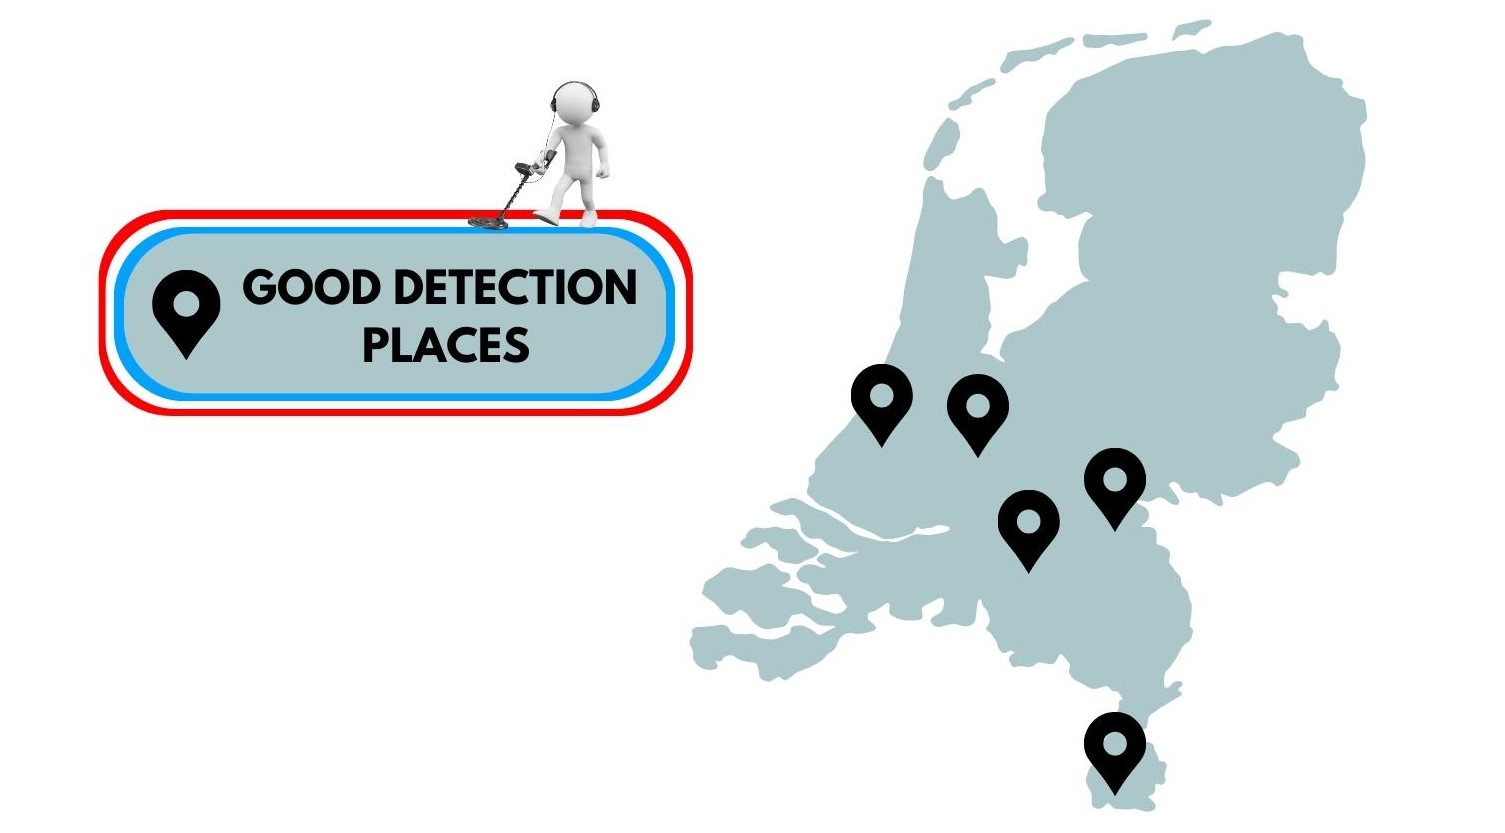 Good metal detection places in the Netherlands. 